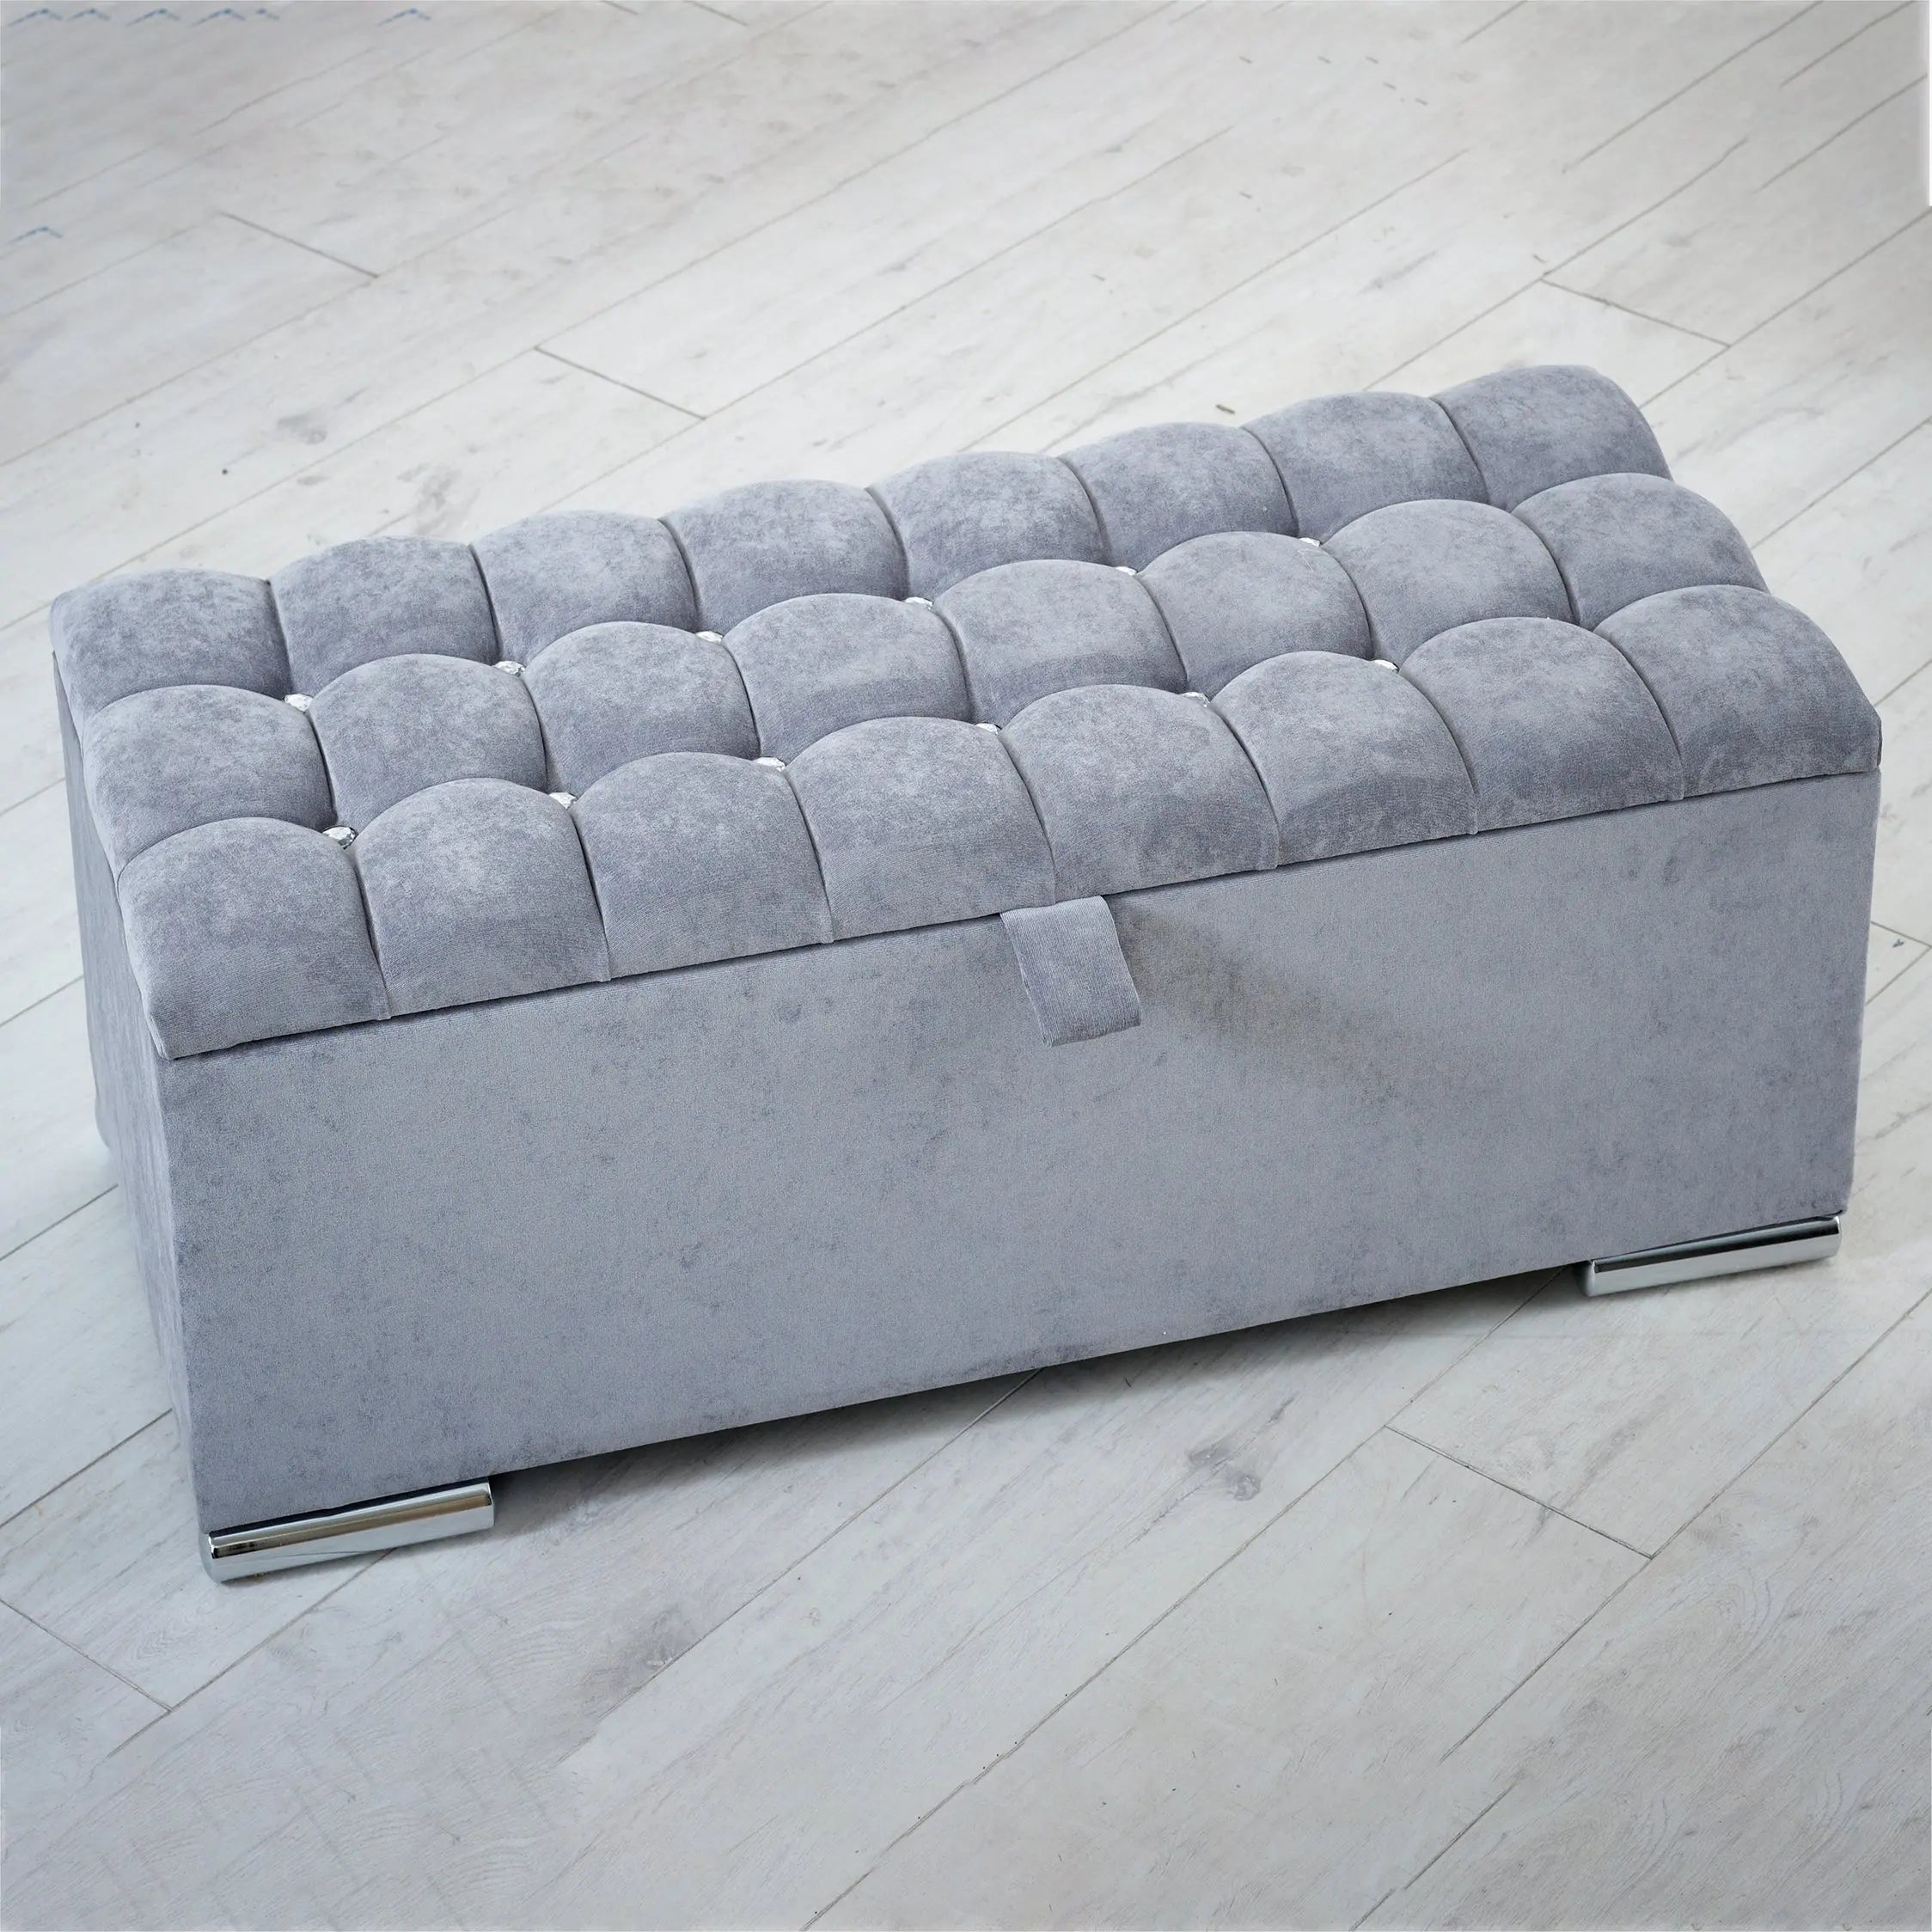 Sandrox Cubed Upholstered Ottoman Box